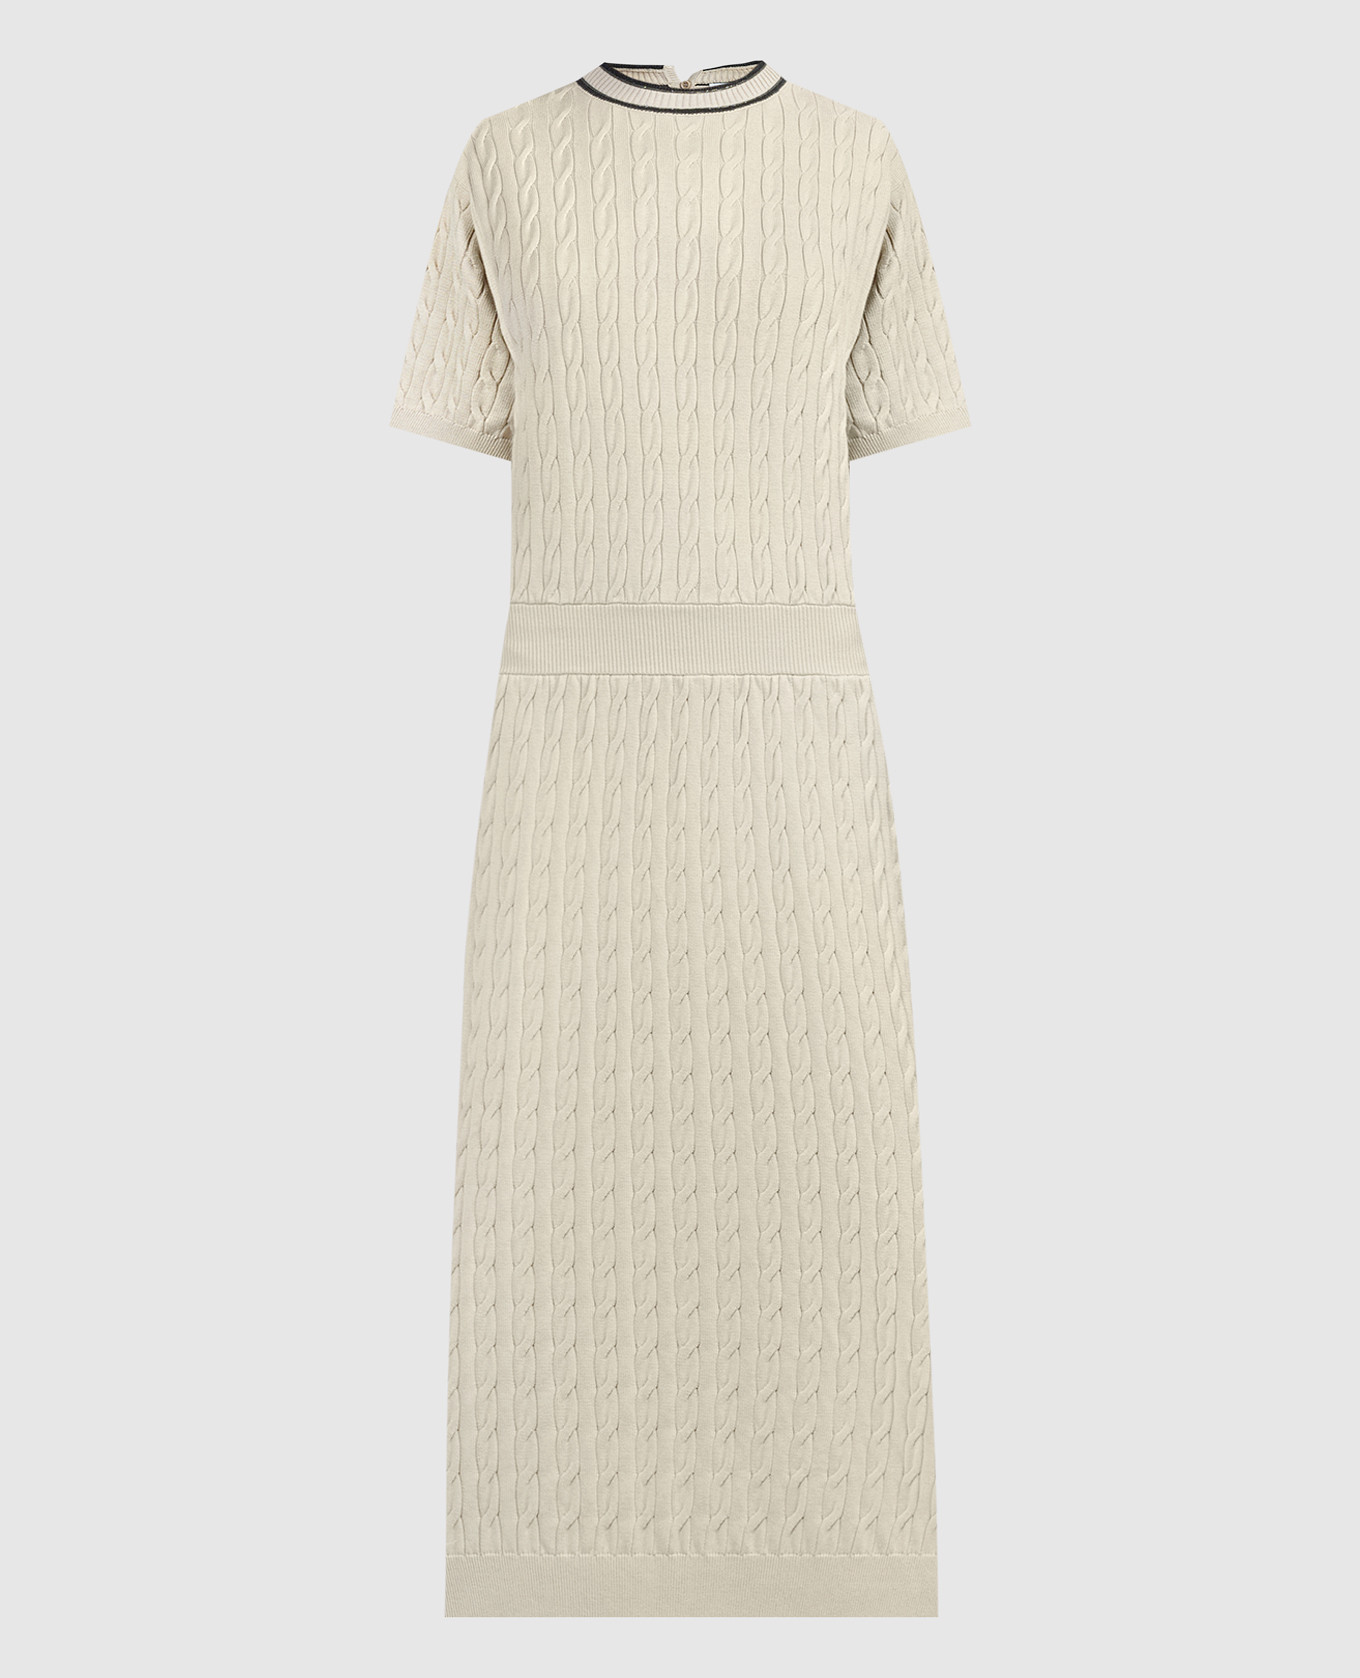 Beige dress with a textured pattern